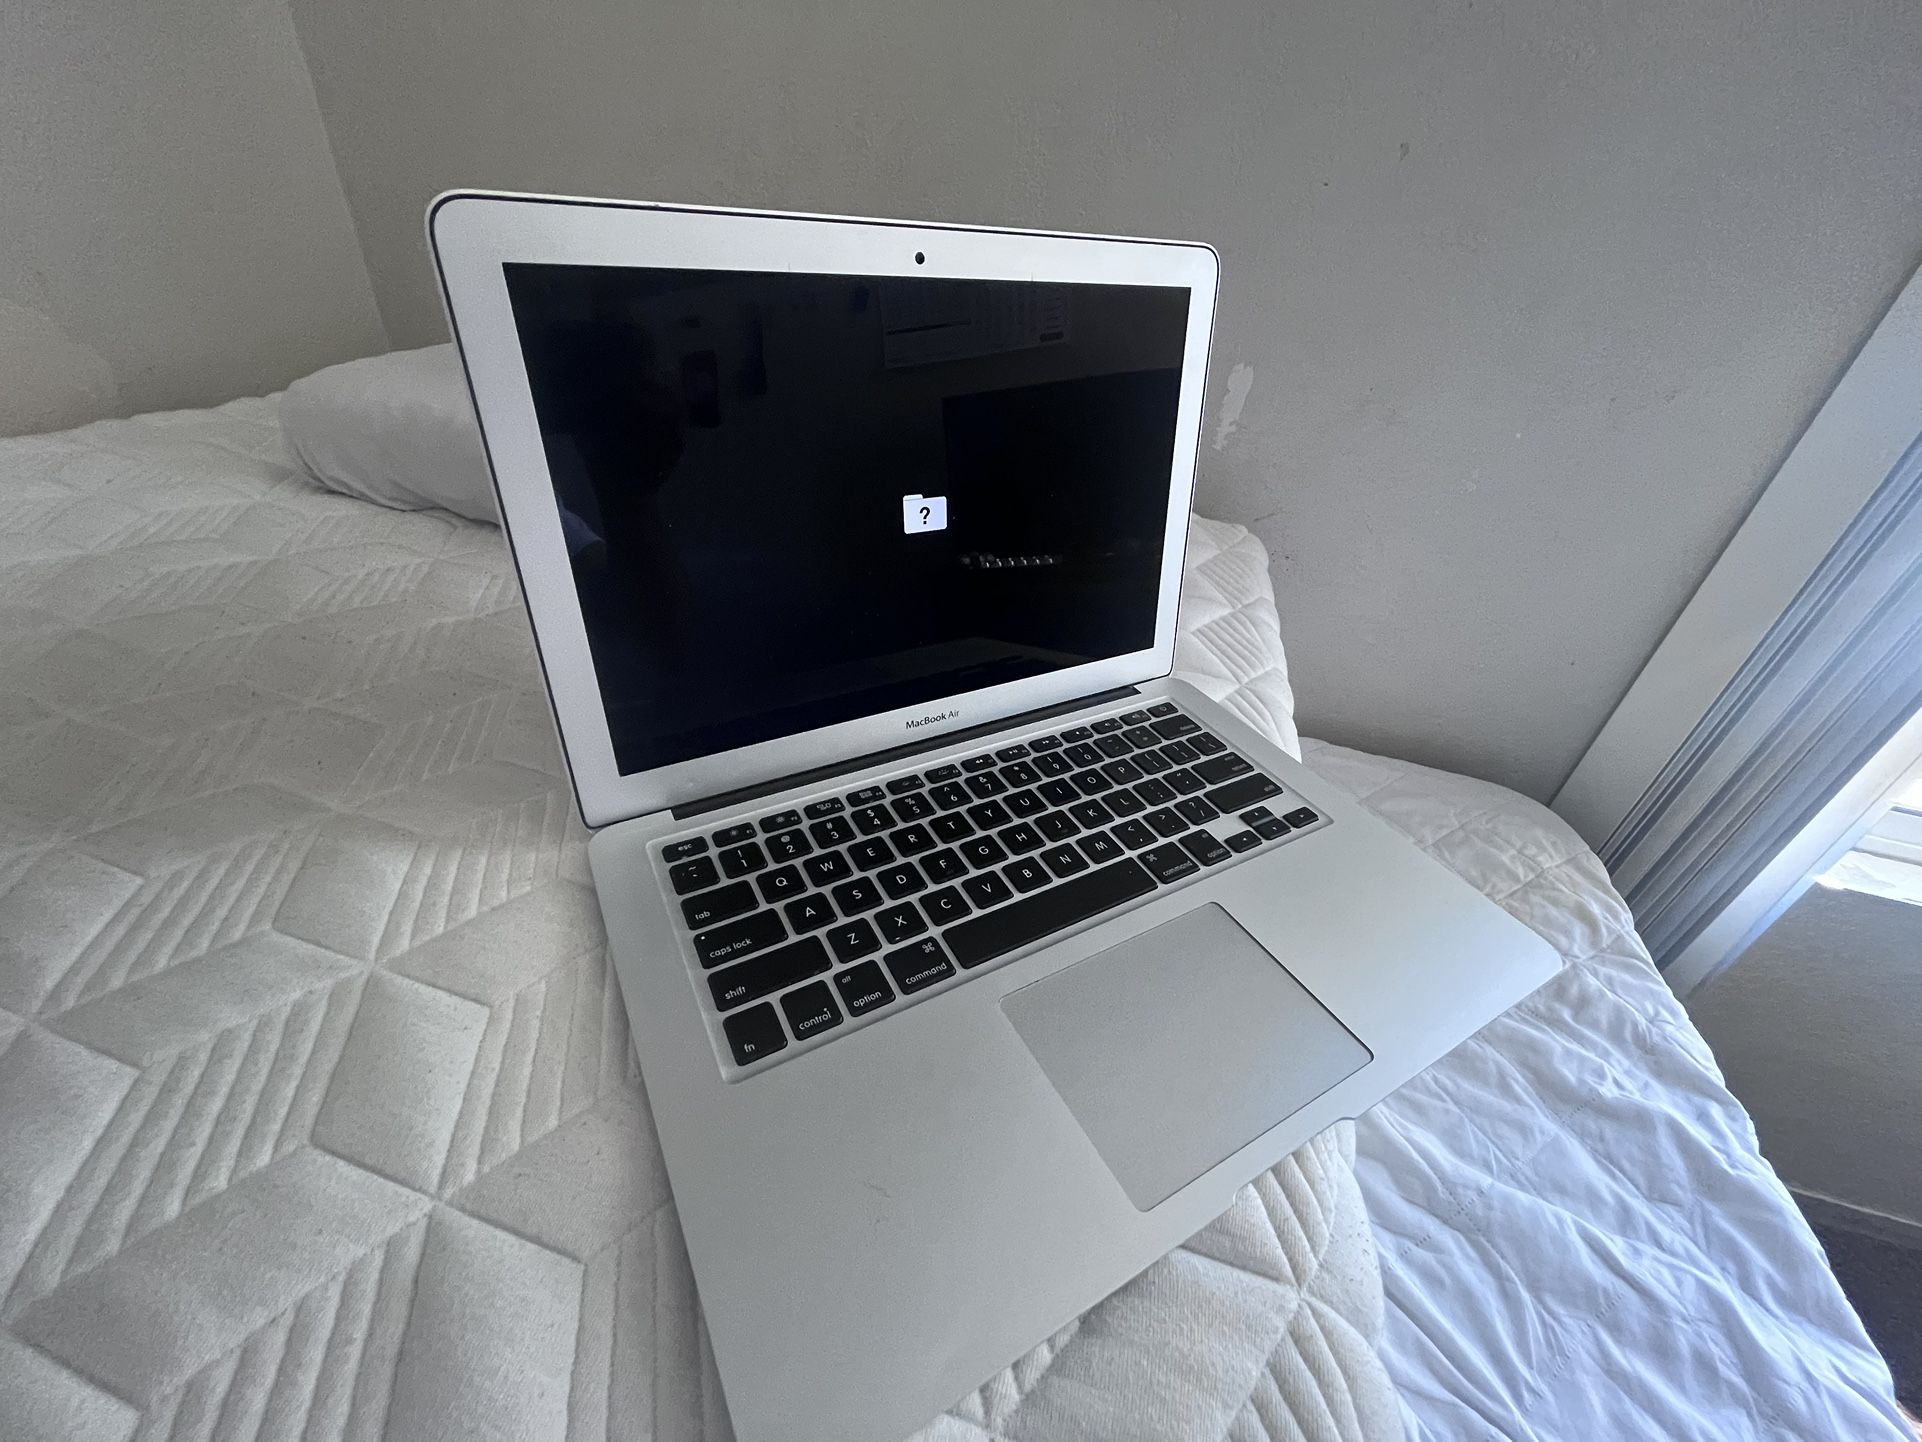 For Sale: 2015 MacBook Air - Needs New Hard Drive